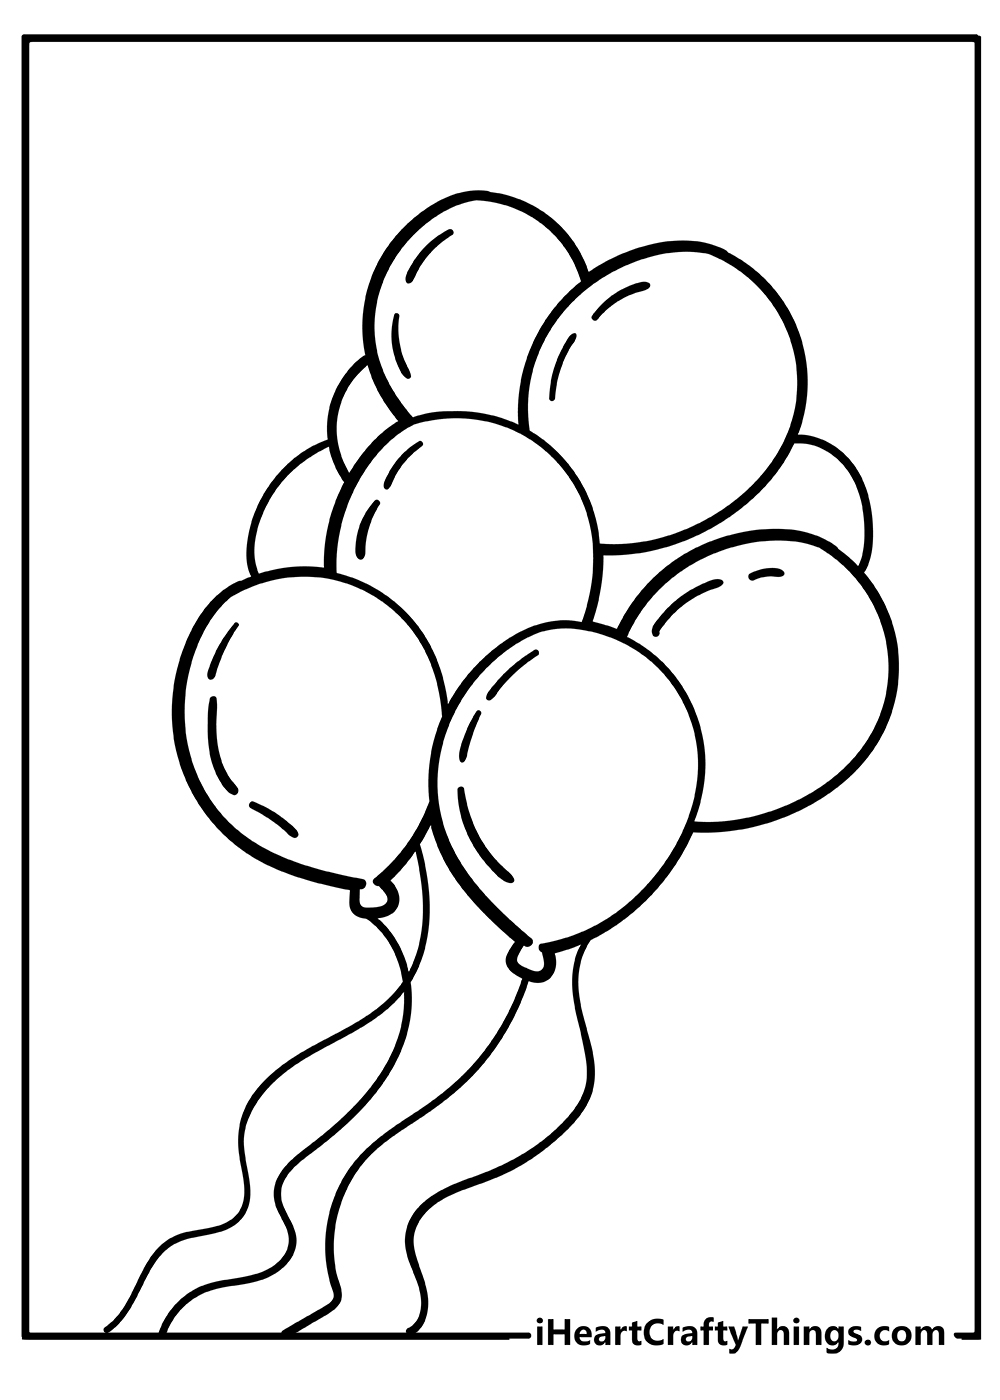 Balloons coloring pages free printables